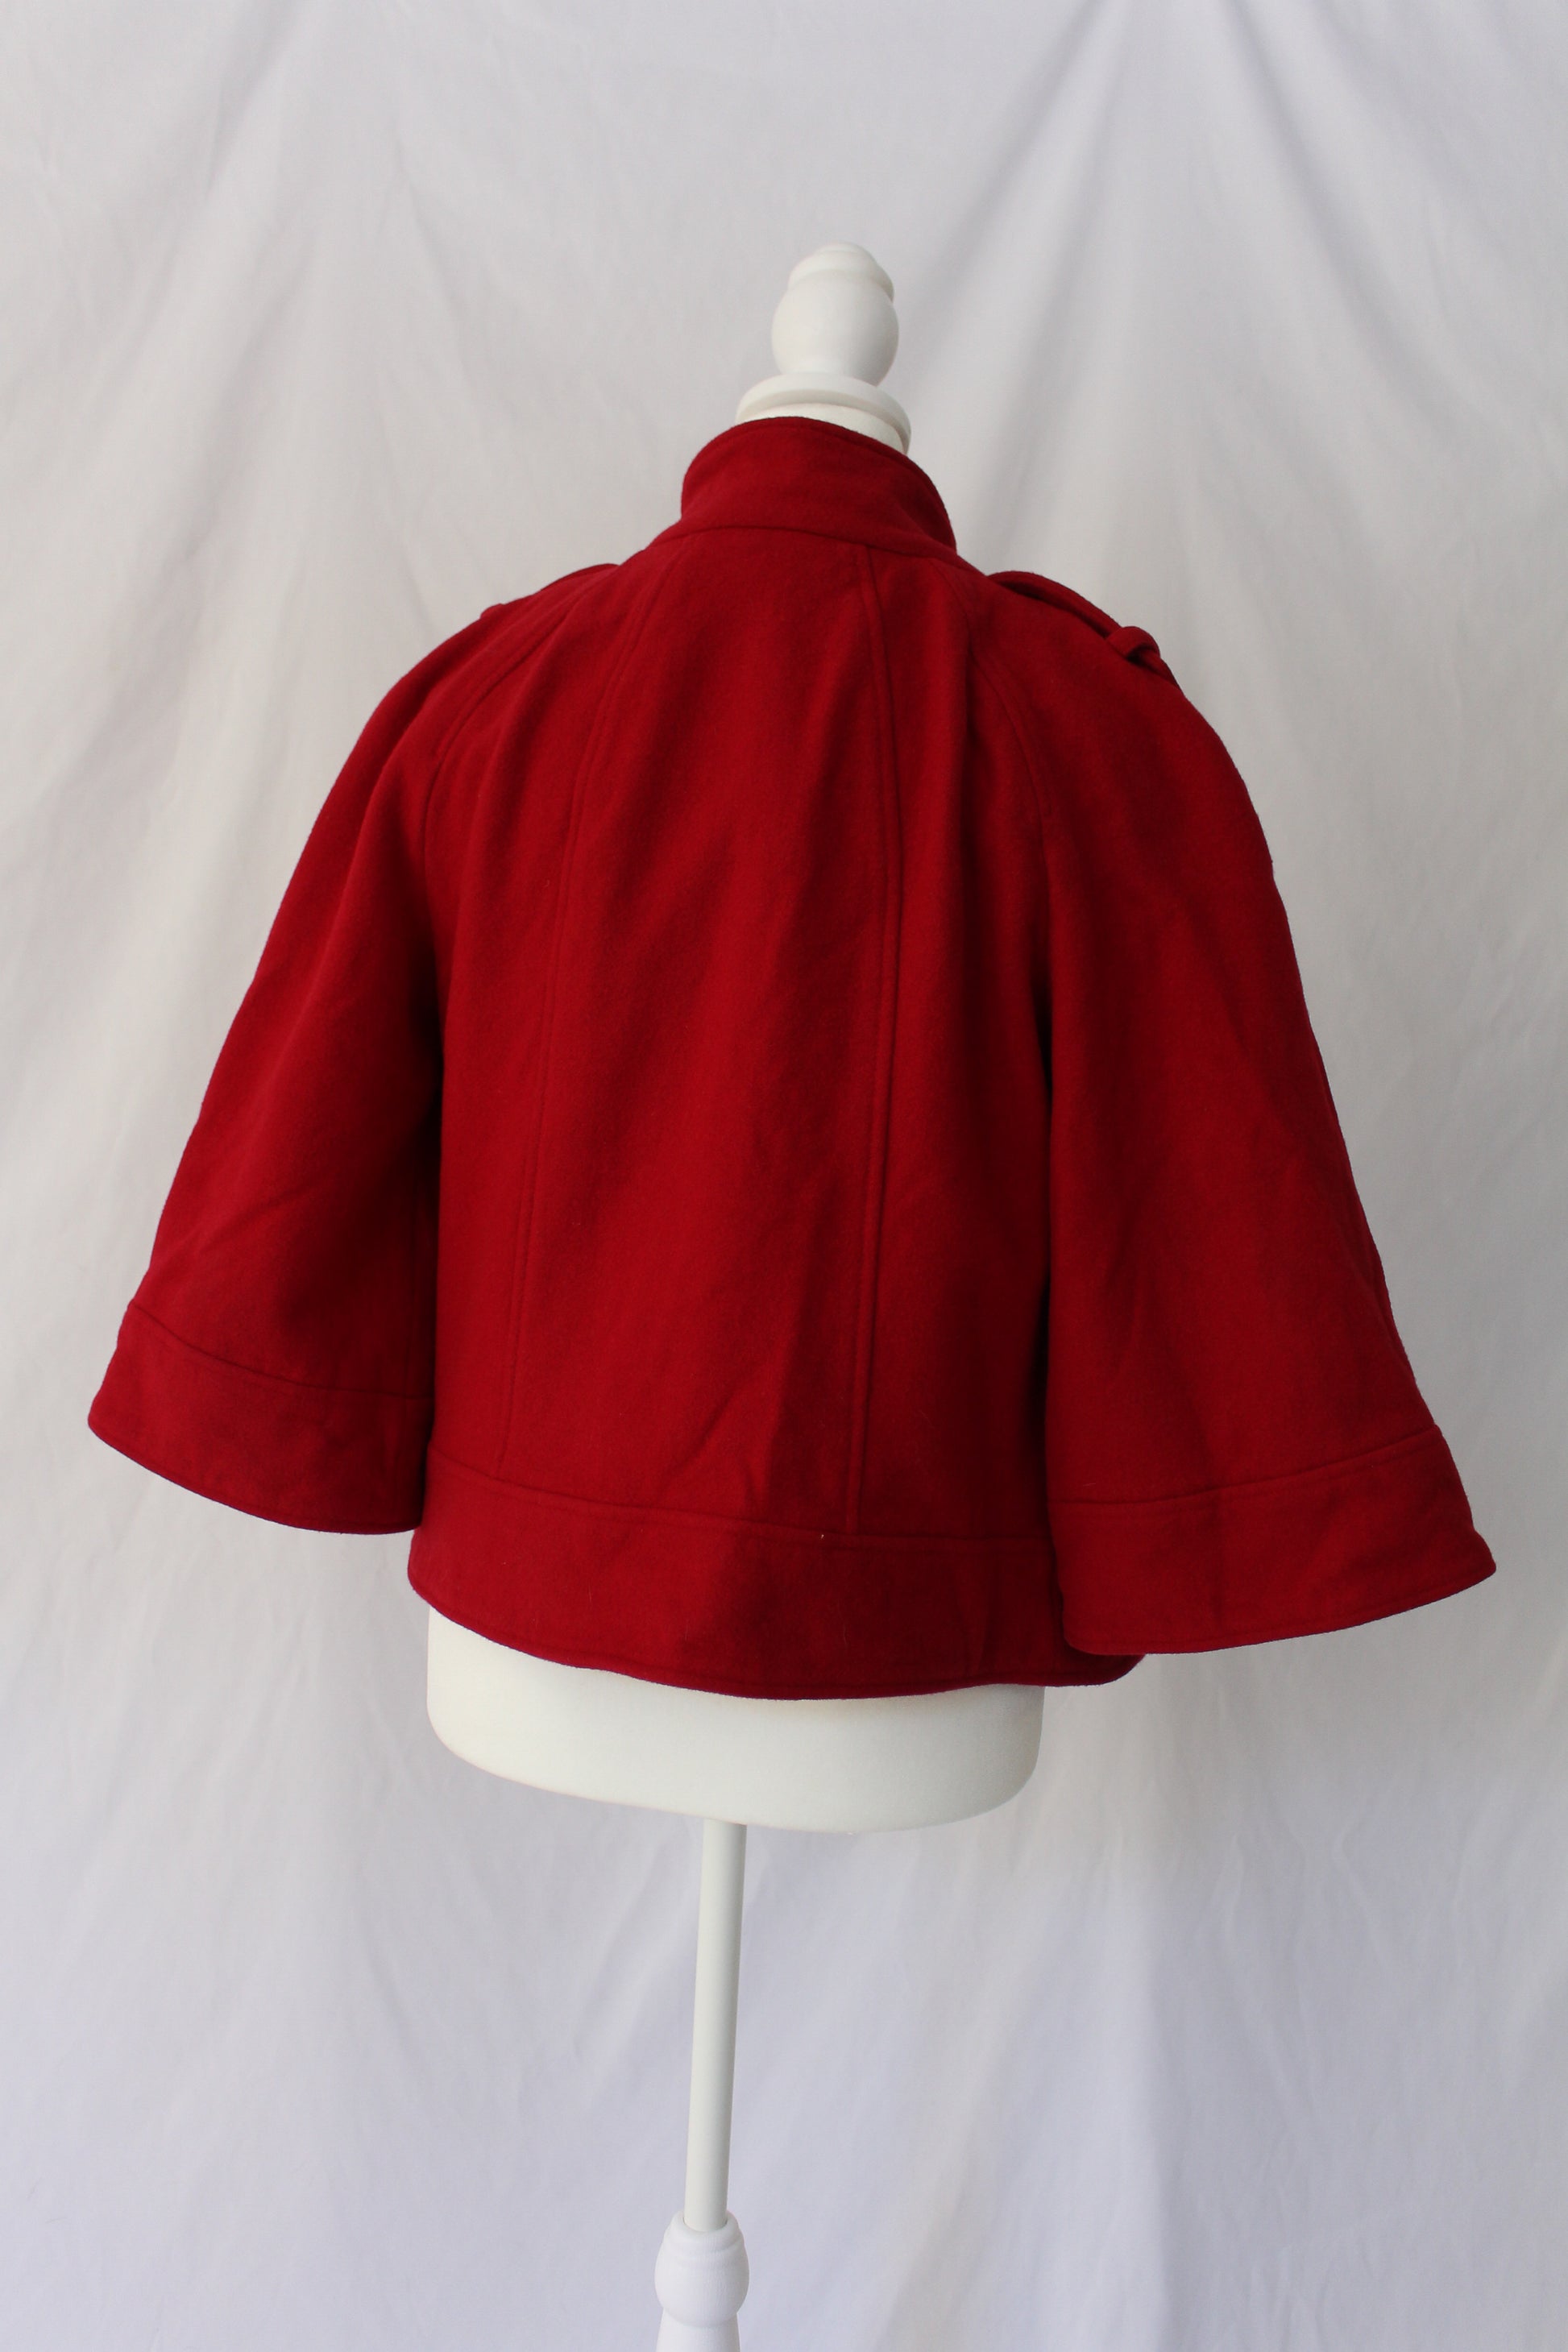 red coat with angled zipper, secondhand red coat with short sleeves